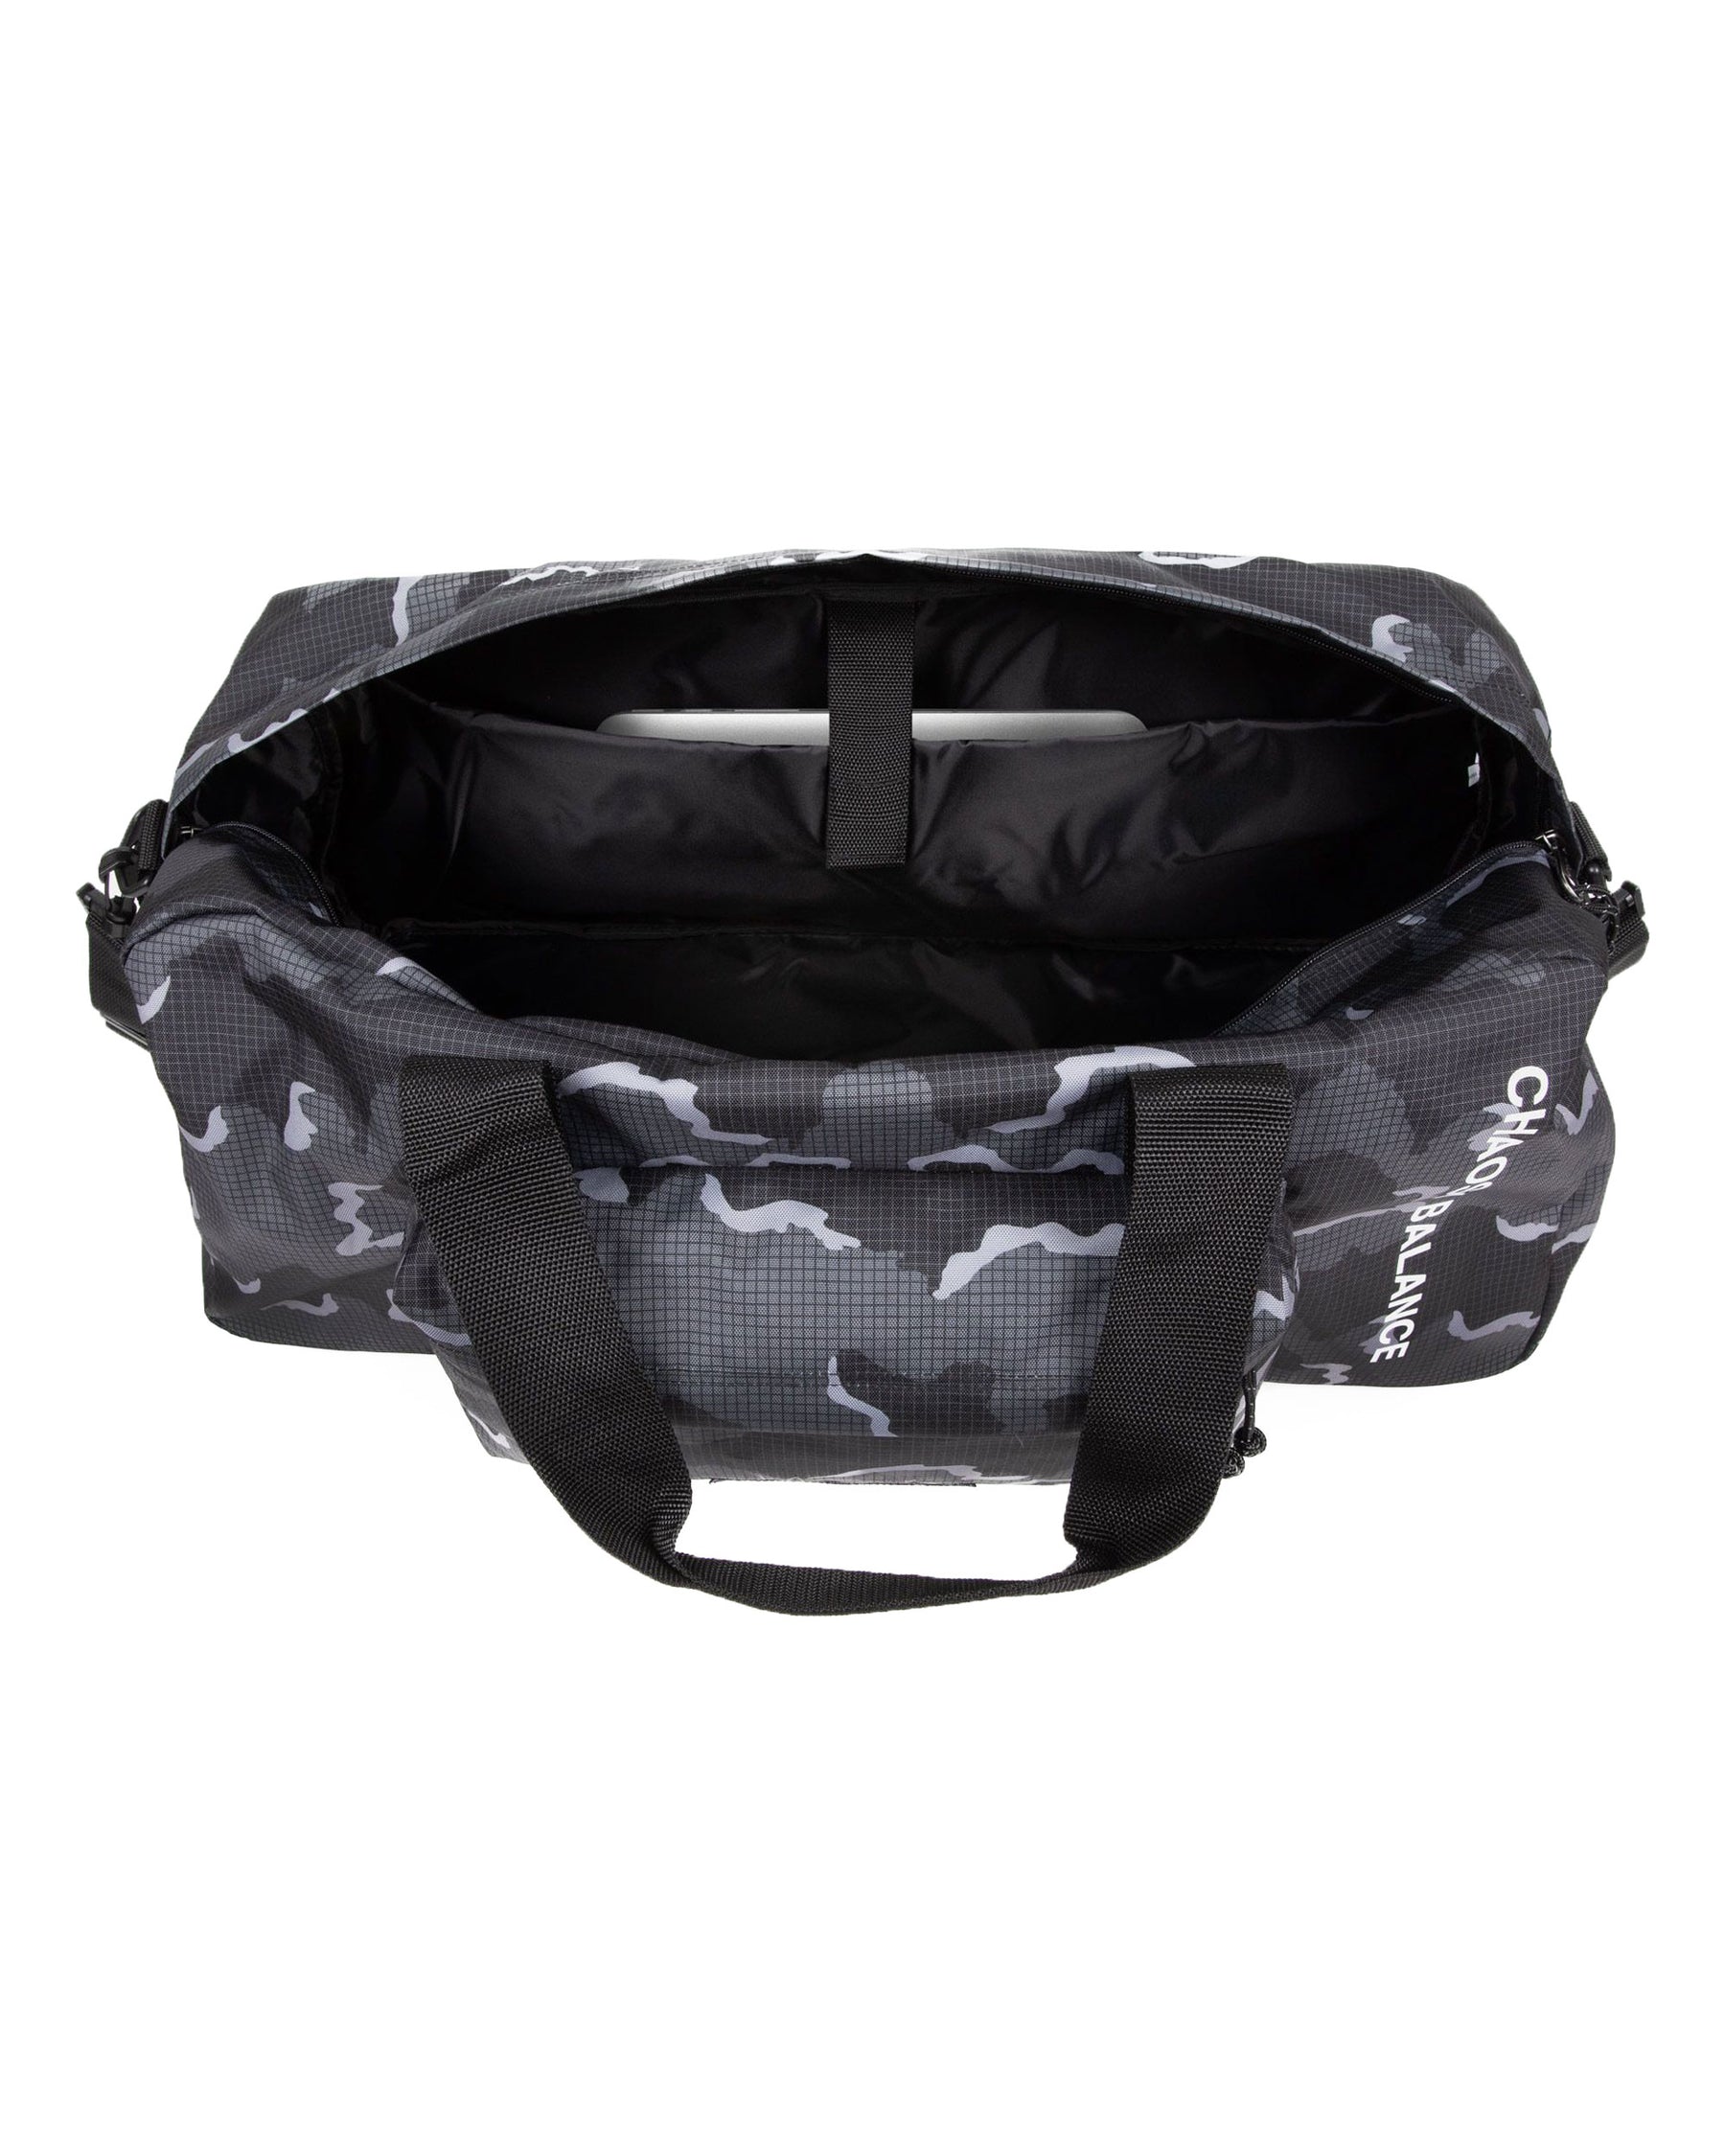 Undercover X Eastpak Stand Uc Black Camo Bag